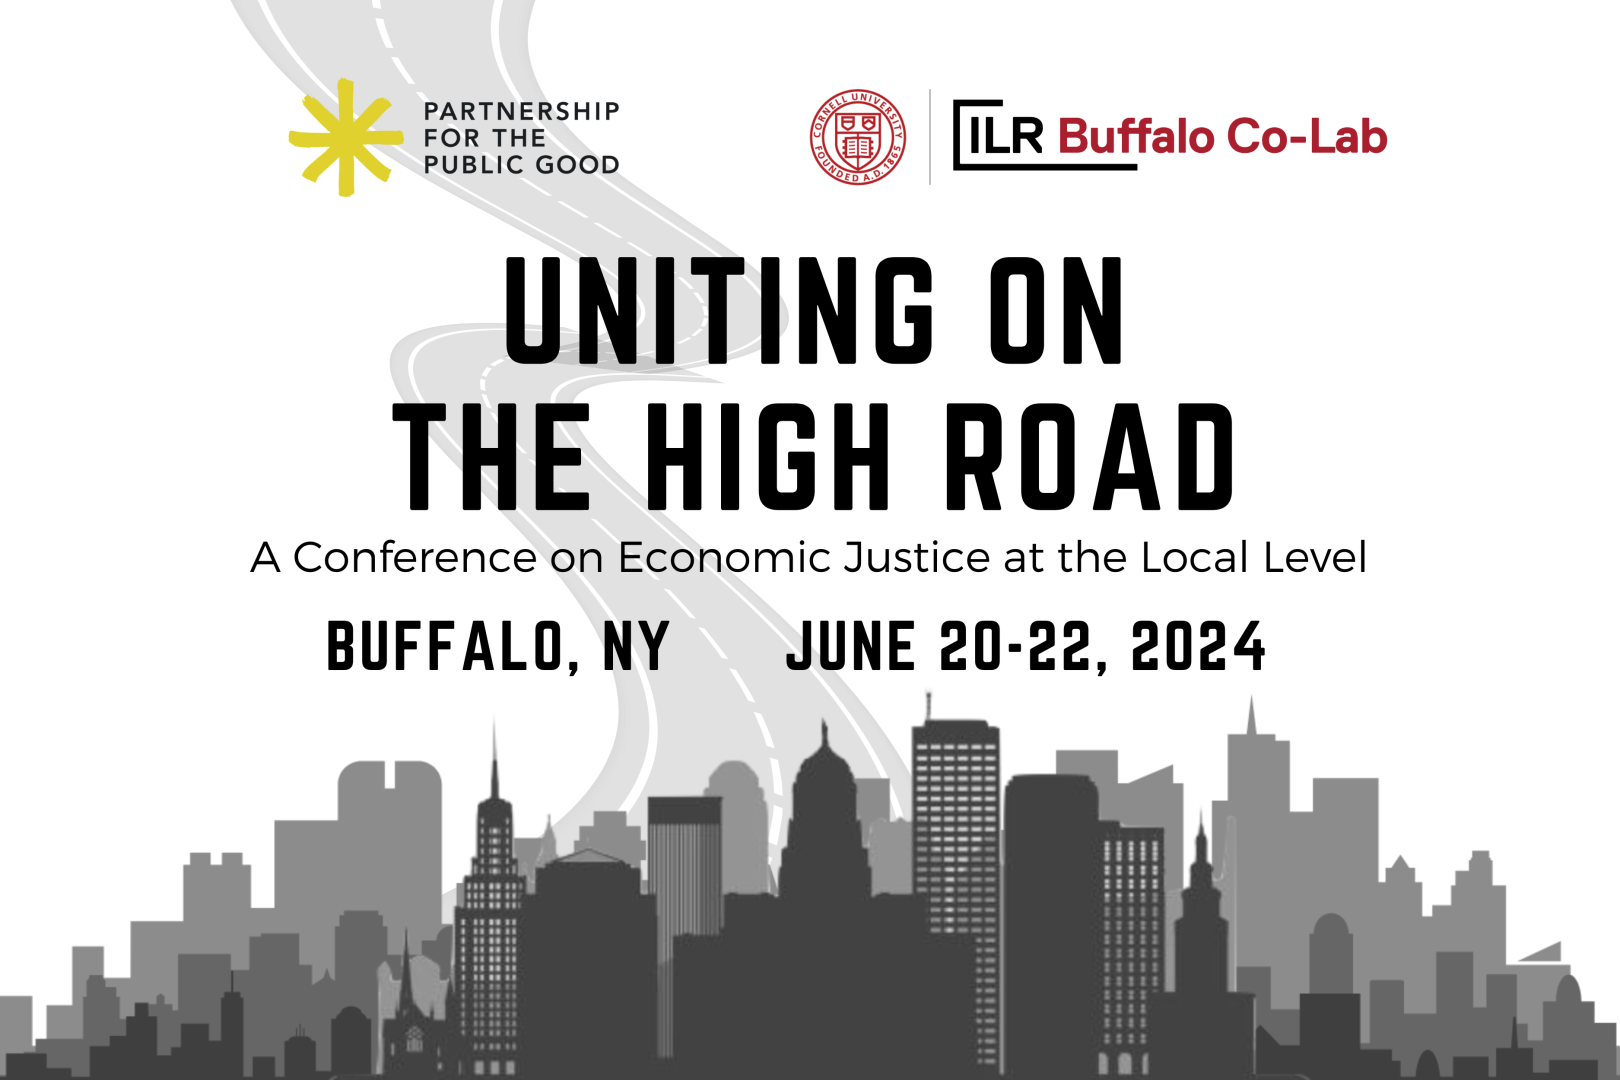 SAVE THE DATE: Uniting on the High Road Conference